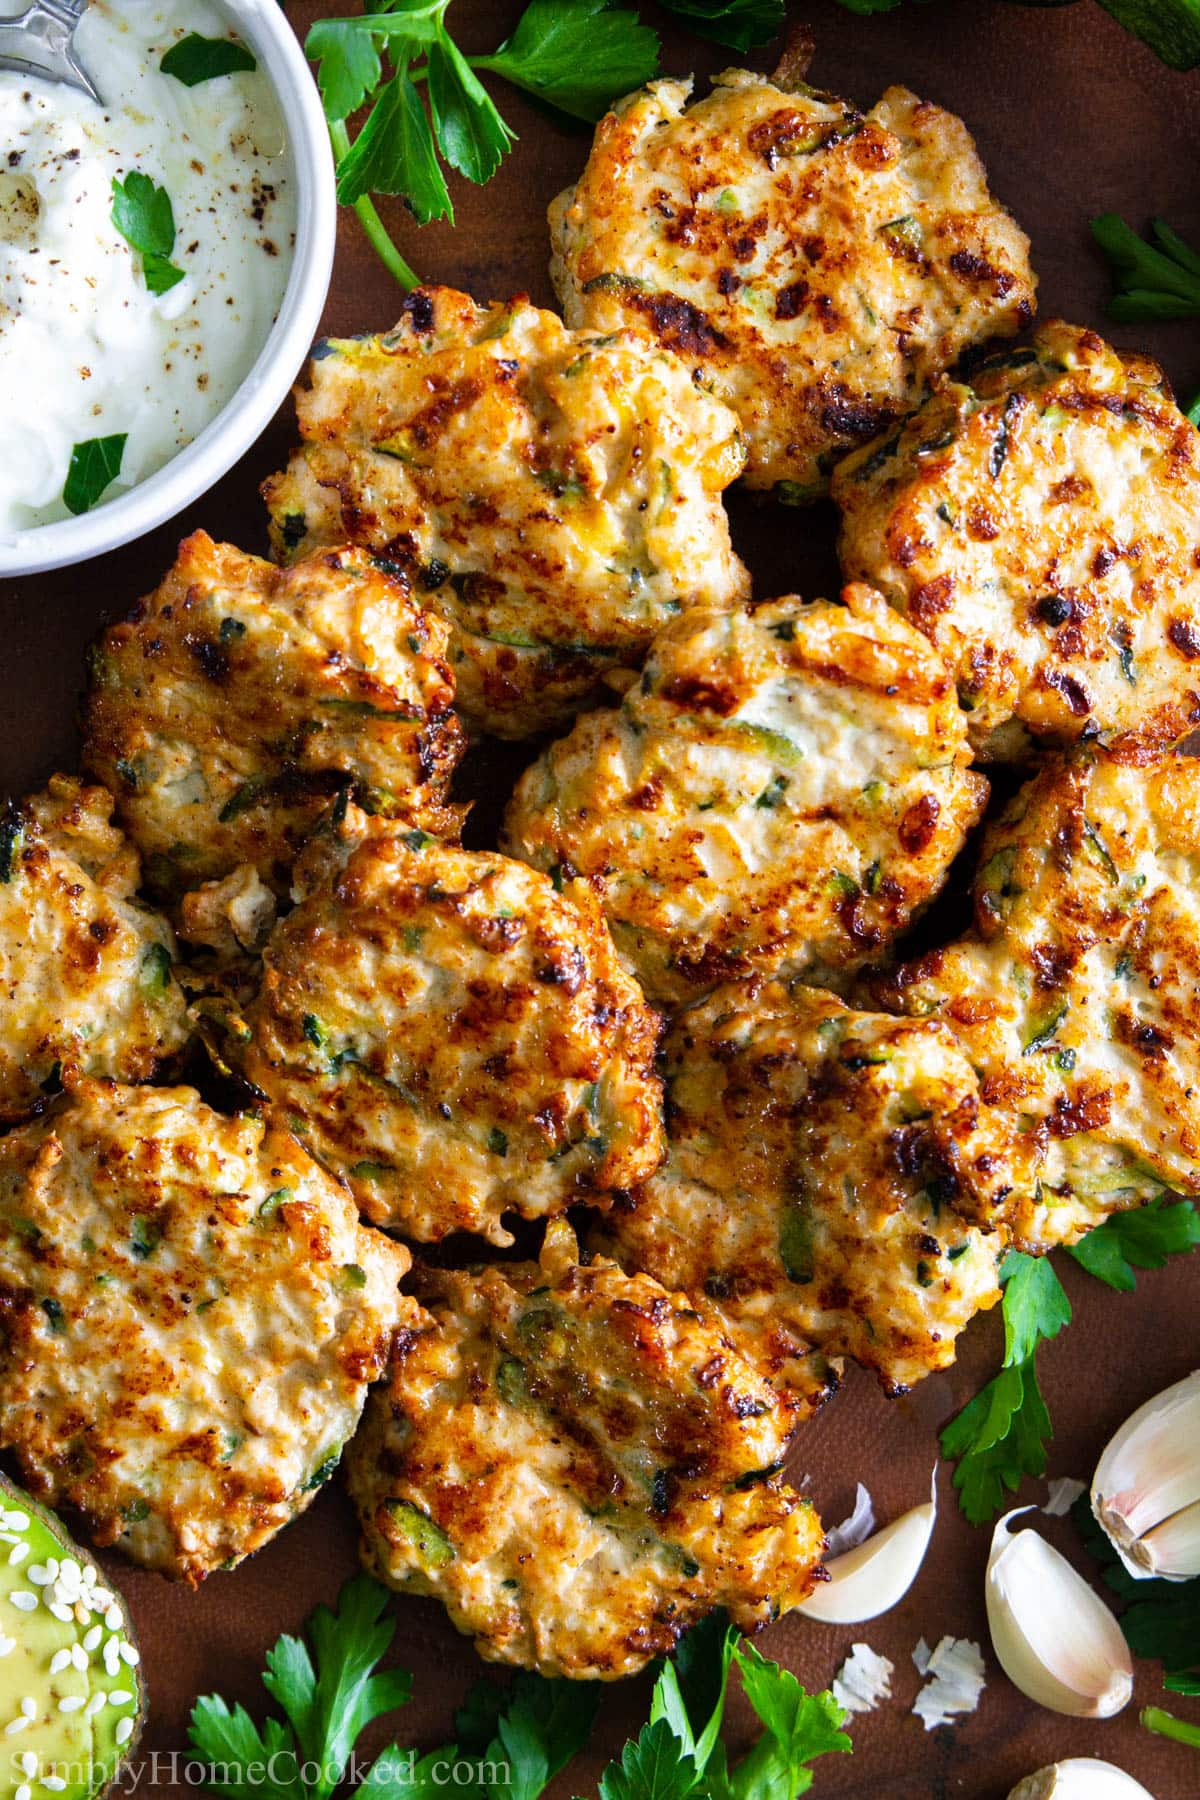 Vertical image of Chicken Fritters with Zucchini with sauce nearby